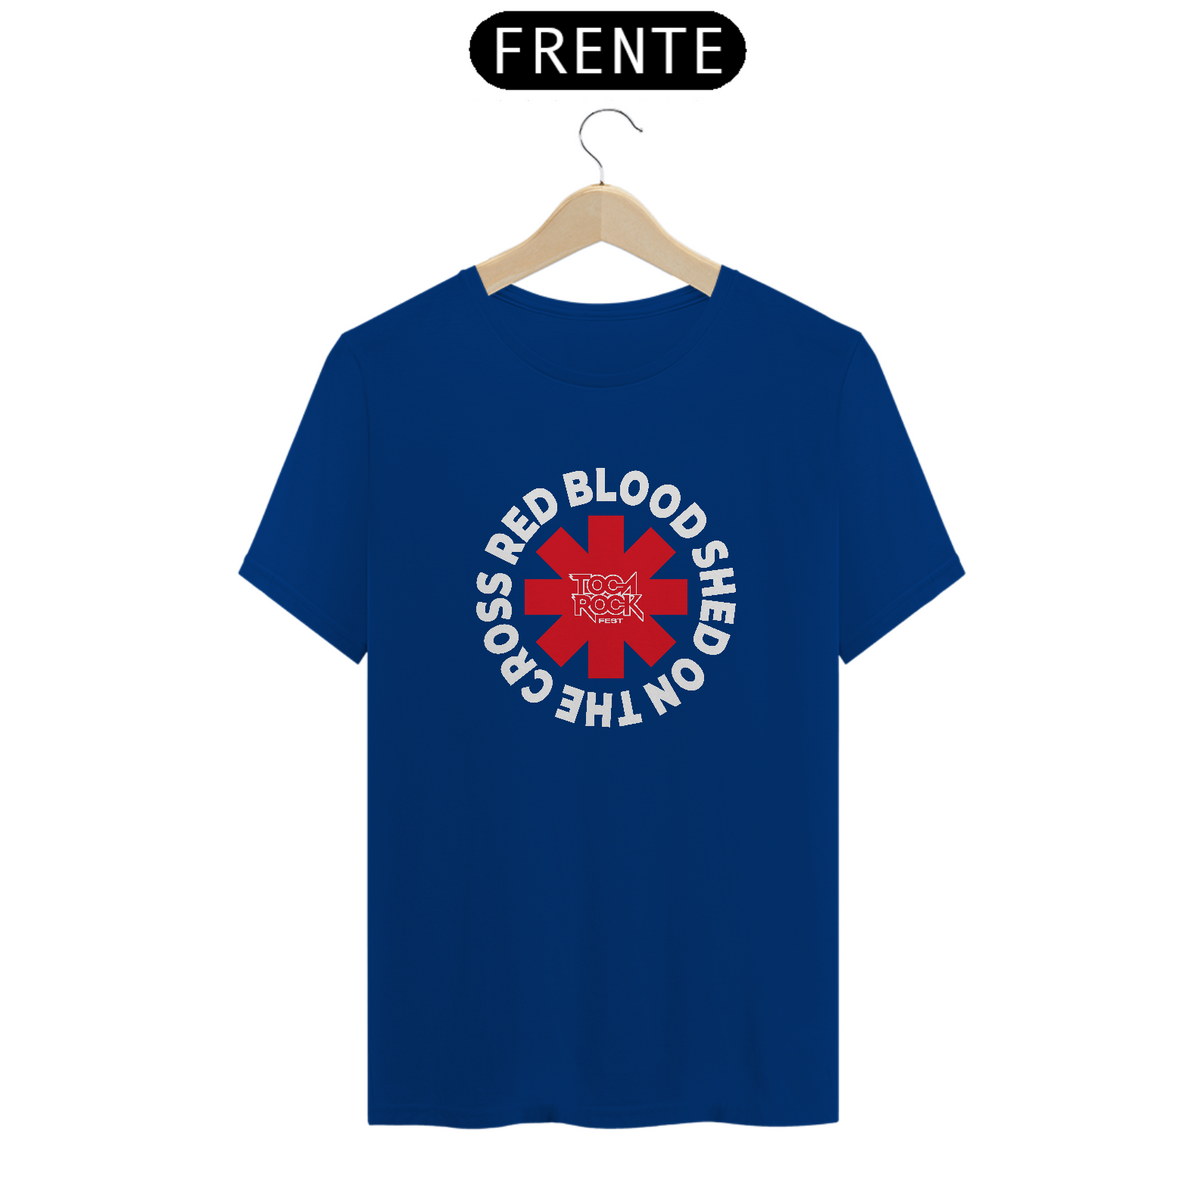 Nome do produto: Camiseta - Red Blood Shed On The Cross